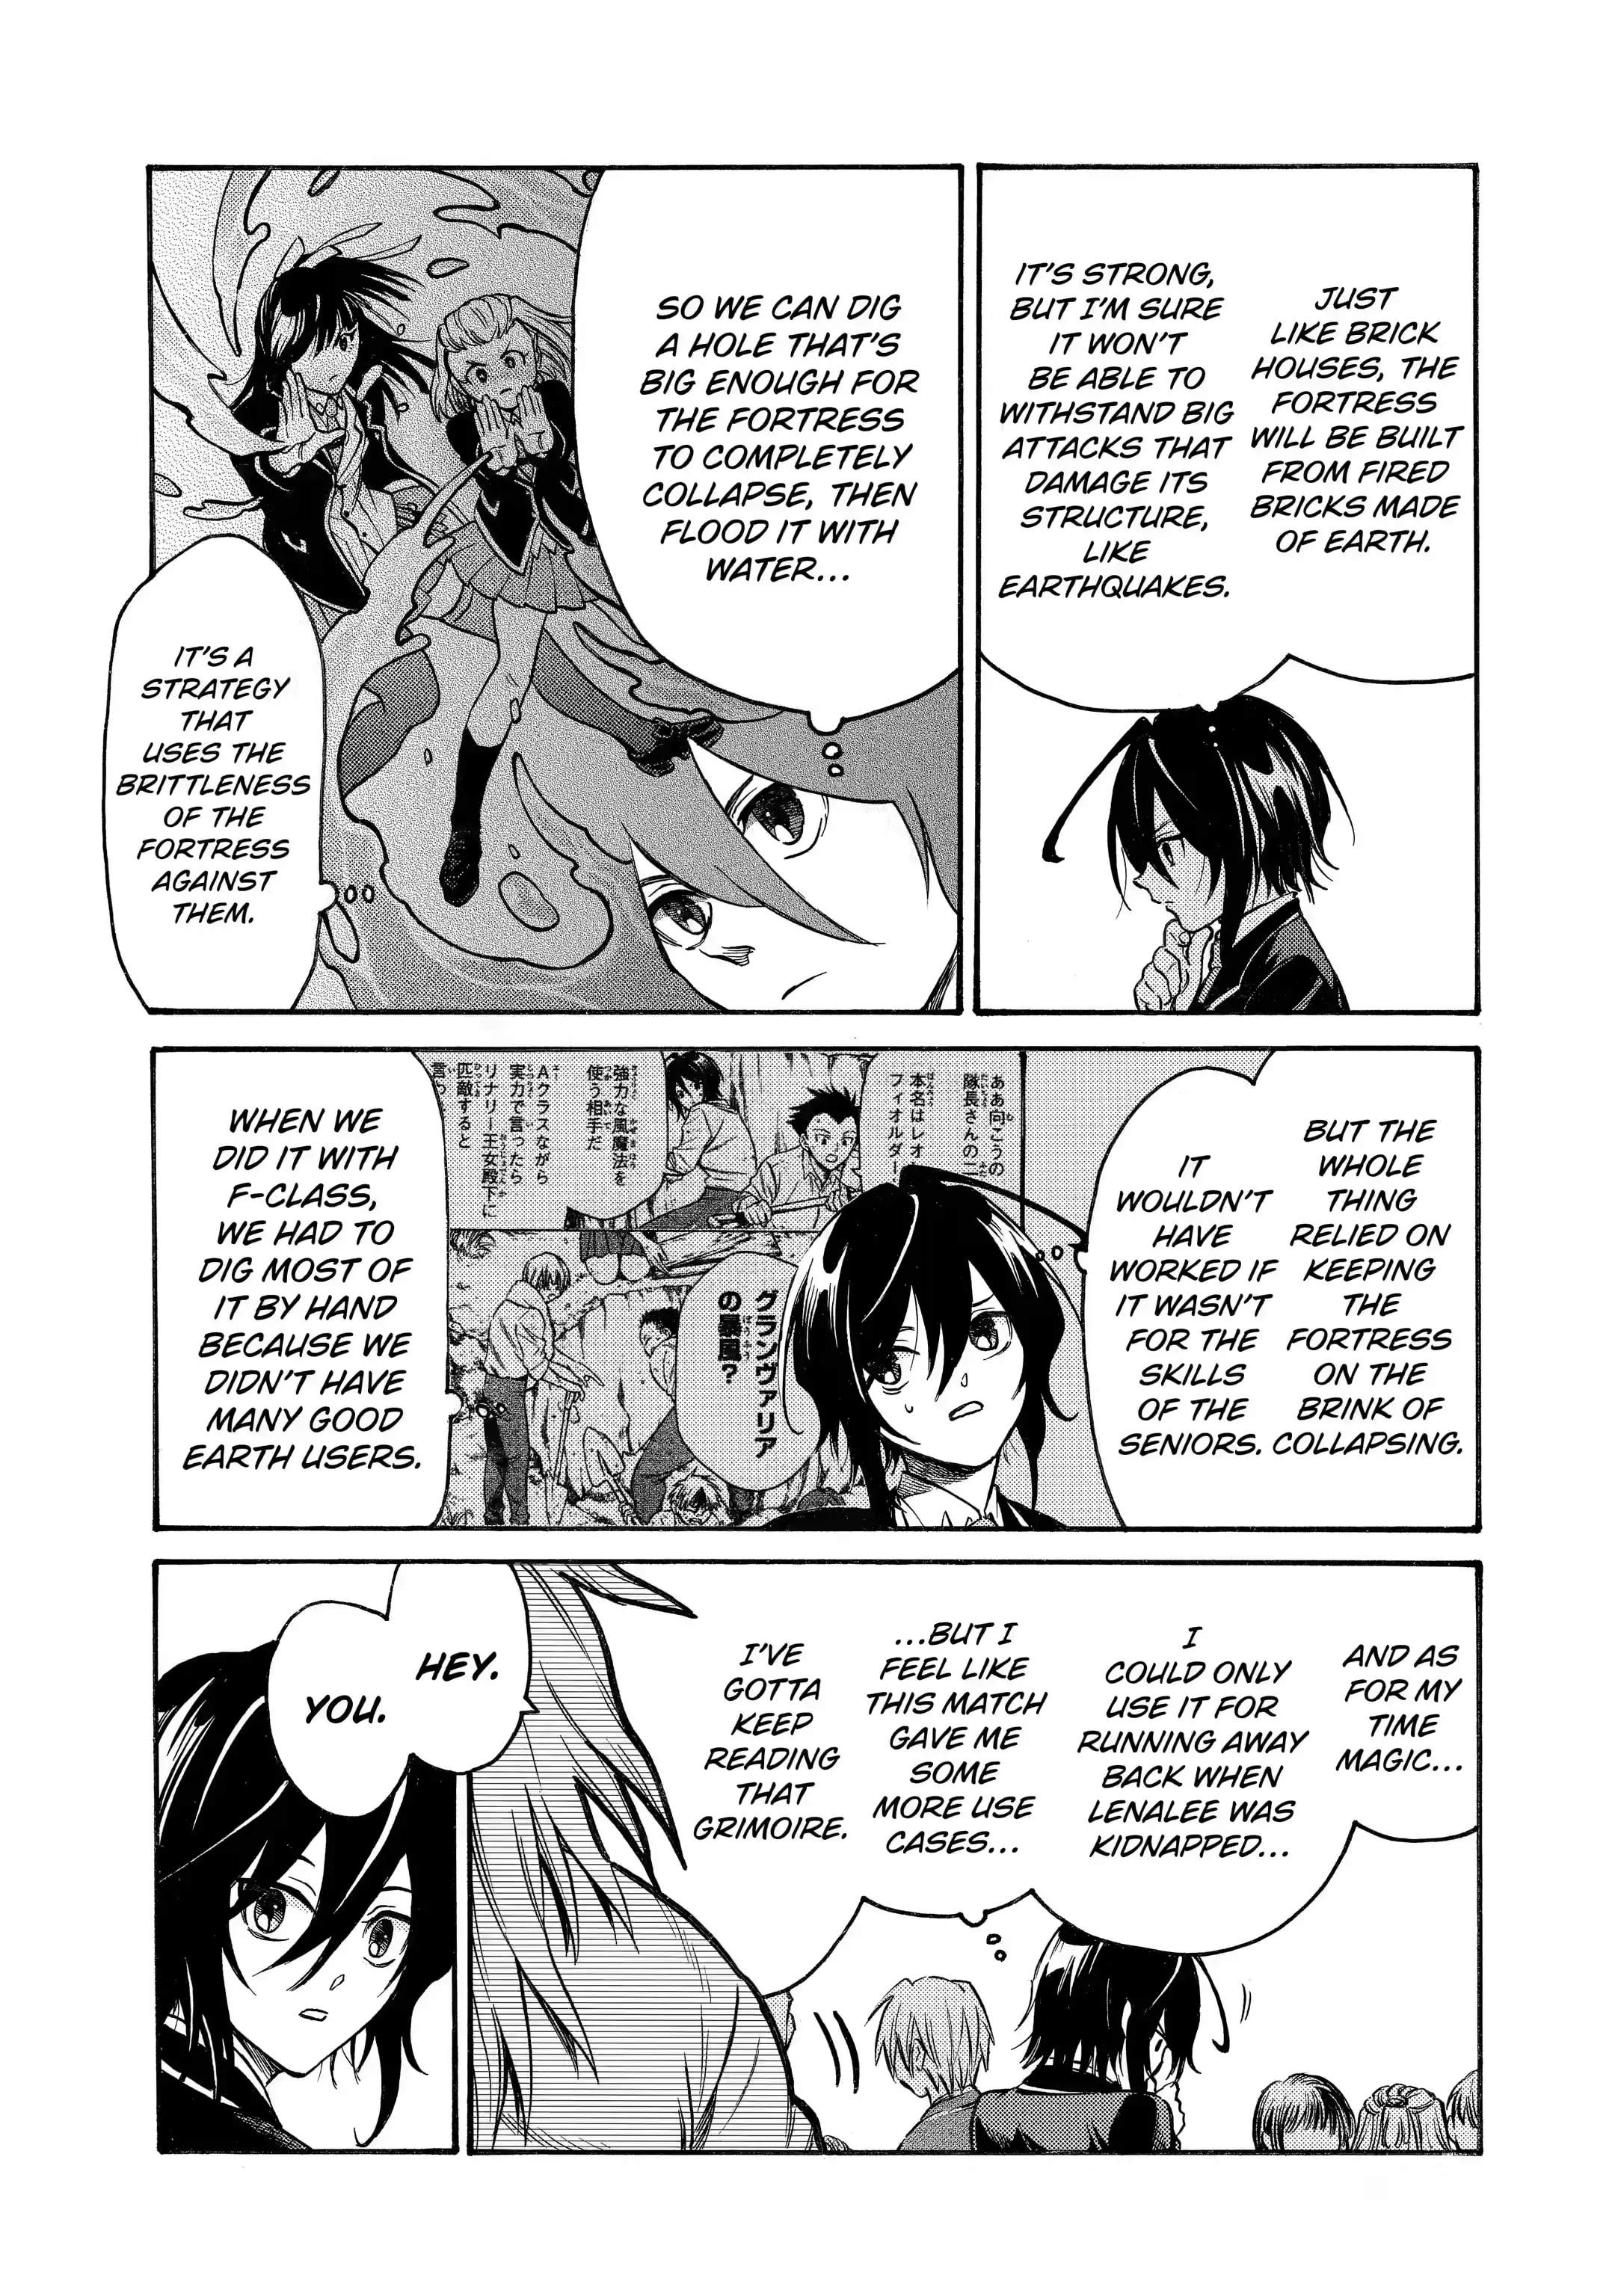 Reincarnation of the Unrivalled Time Mage: The Underachiever at the Magic Academy Turns Out to Be the Strongest Mage Who Controls Time! Chapter 15.3-eng-li - Page 6